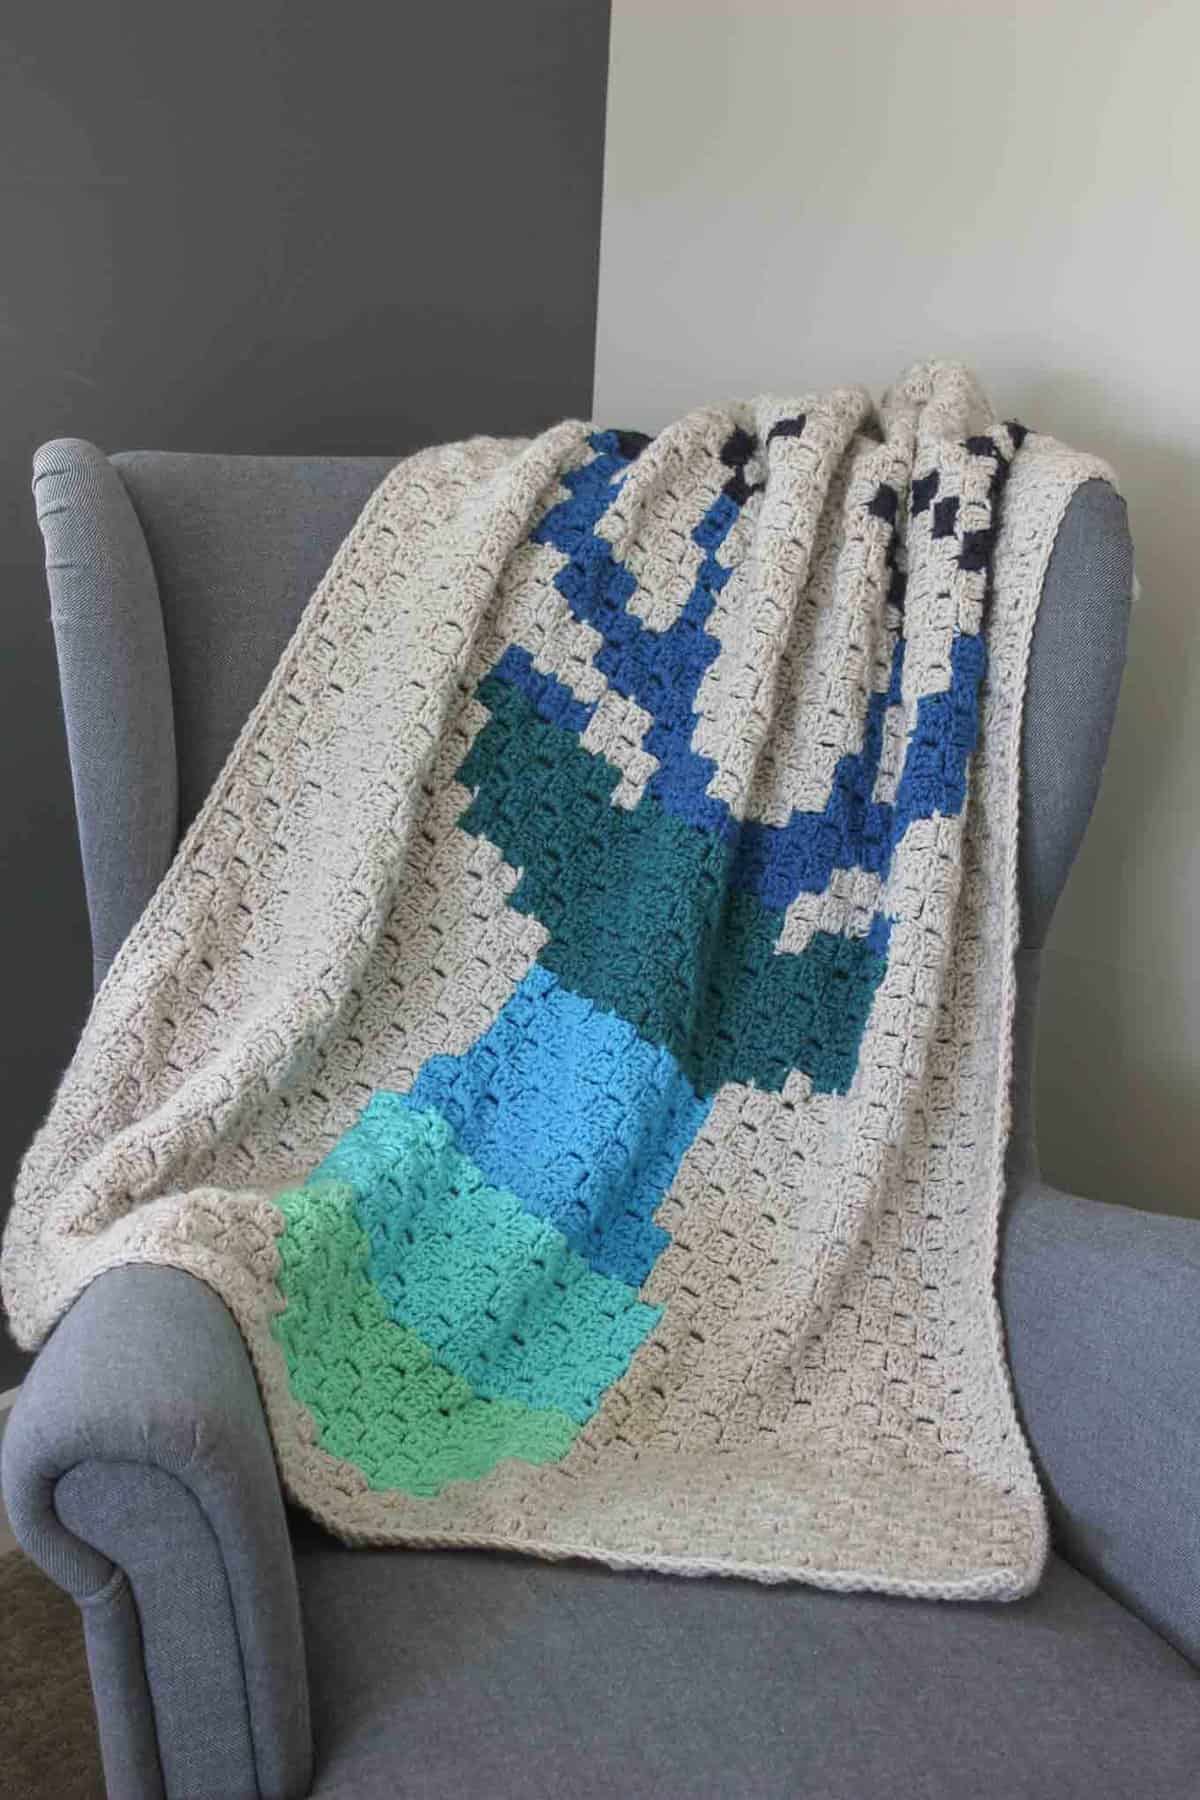 Free deer silhouette crochet afghan pattern. Download the free chart for a baby afghan or larger throw. Great first graphgan project!